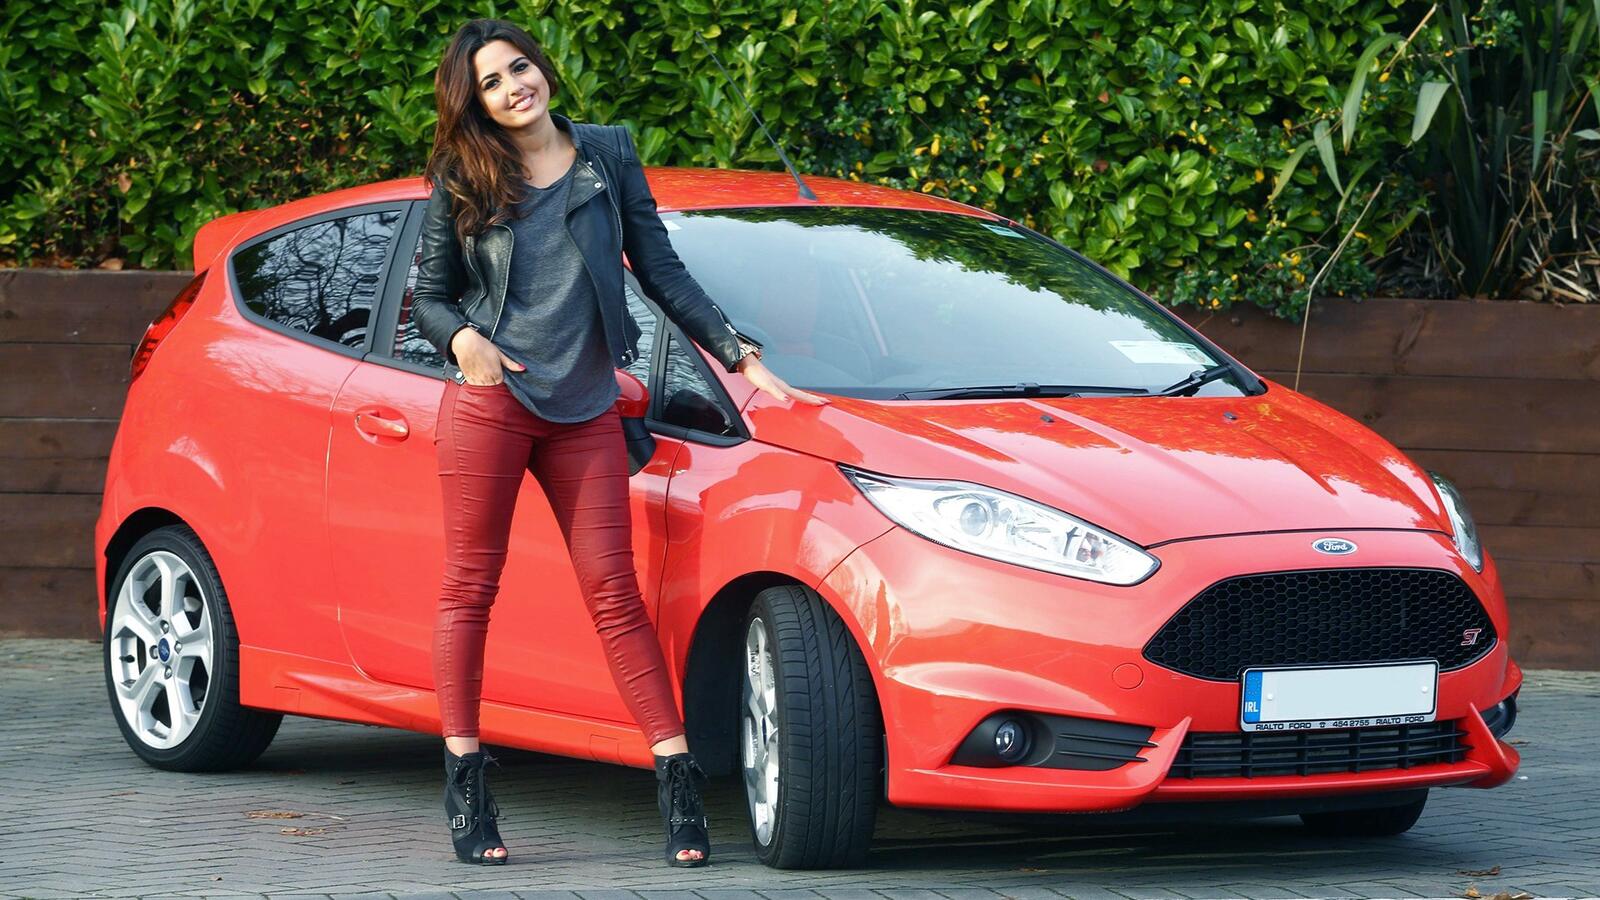 Wallpapers Ford high heels red cars on the desktop